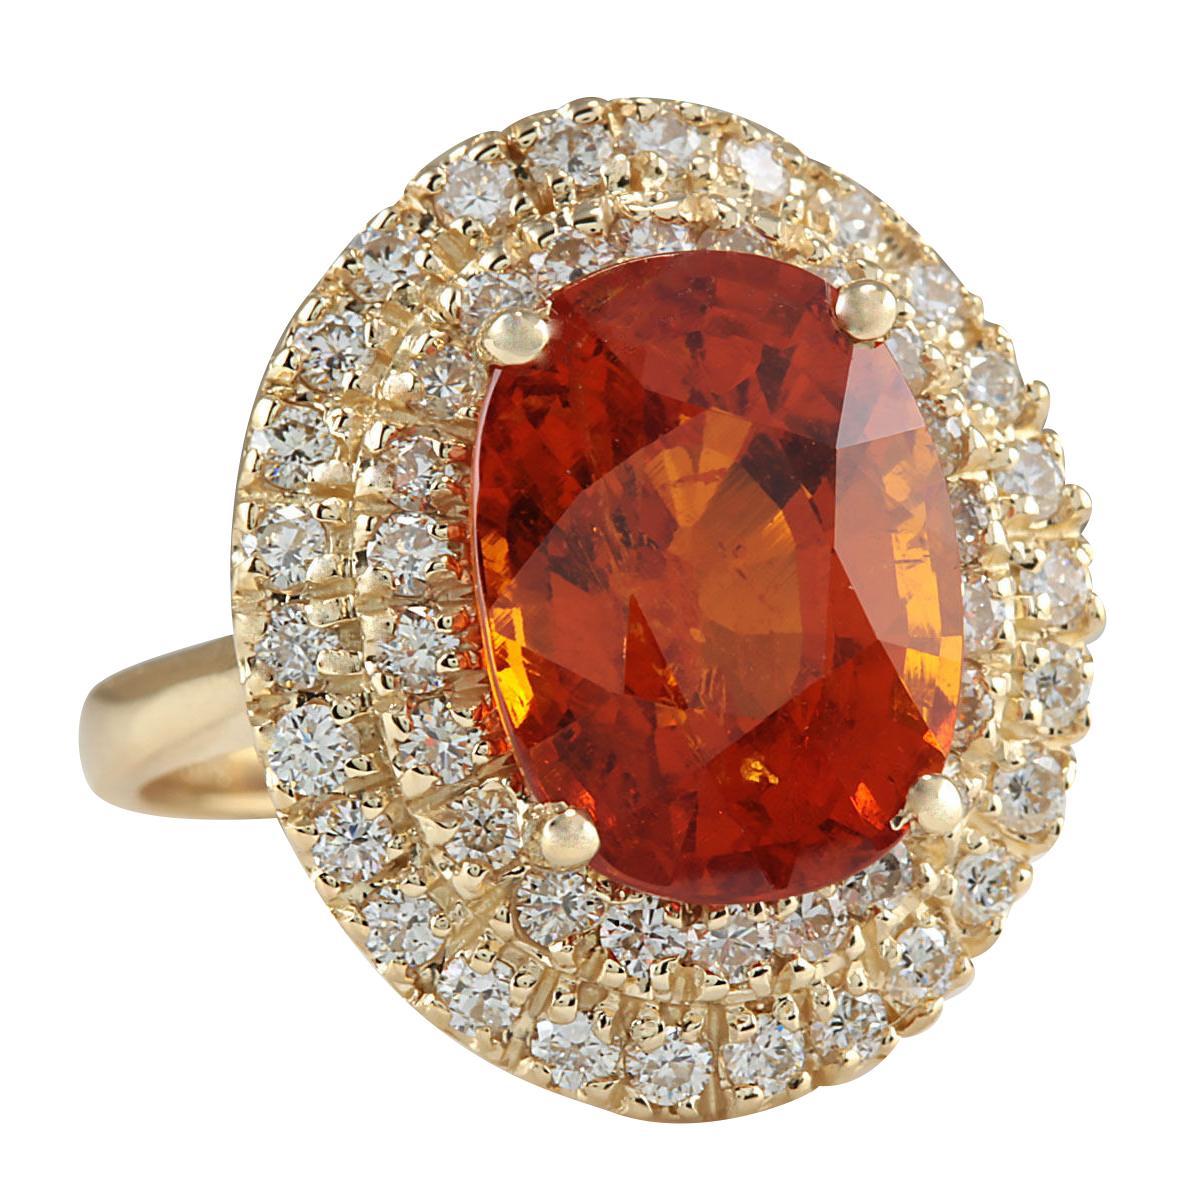 Stamped: 18K Yellow Gold<br />Total Ring Weight: 5.0 Grams<br />Ring Length: N/A<br />Ring Width: N/A<br />Gemstone Weight: Total  Mandarin Garnet Weight is 10.34 Carat (Measures: 14.35x10.77 mm)<br />Color: Orange<br />Diamond Weight: Total 